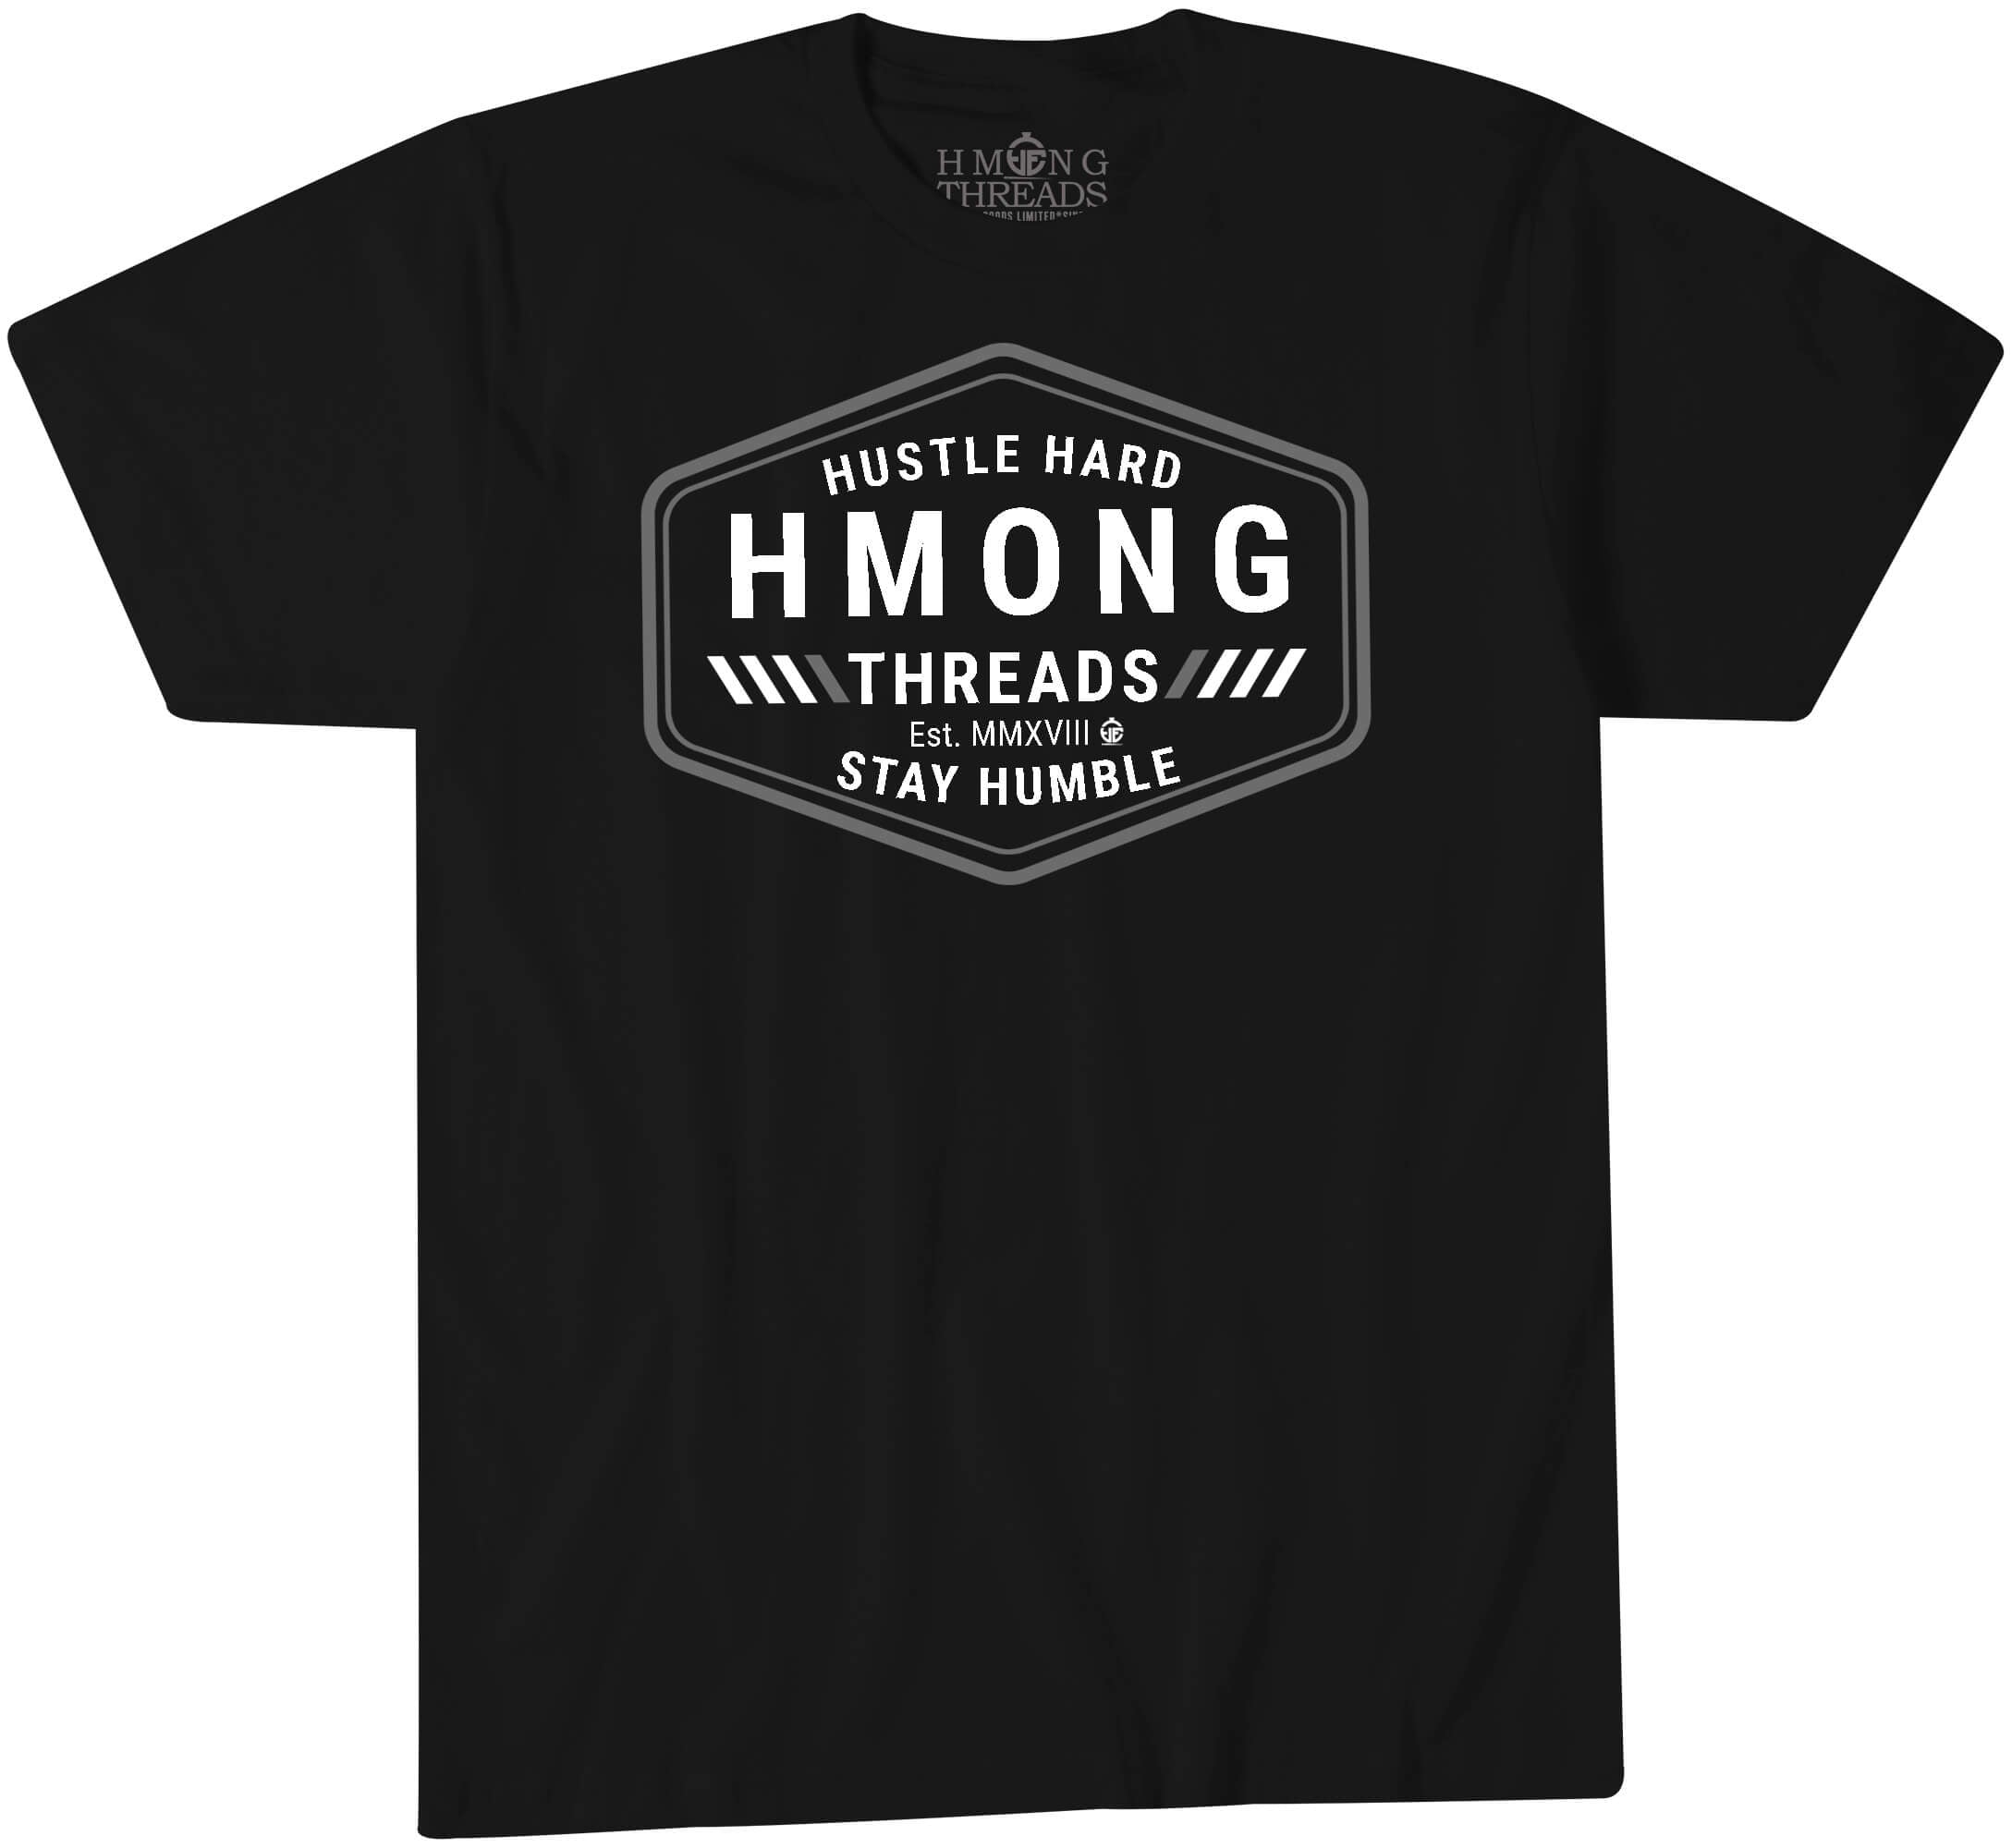 Hustle Hard, Stay Humble - Black Color T-Shirt - HMONG THREADS